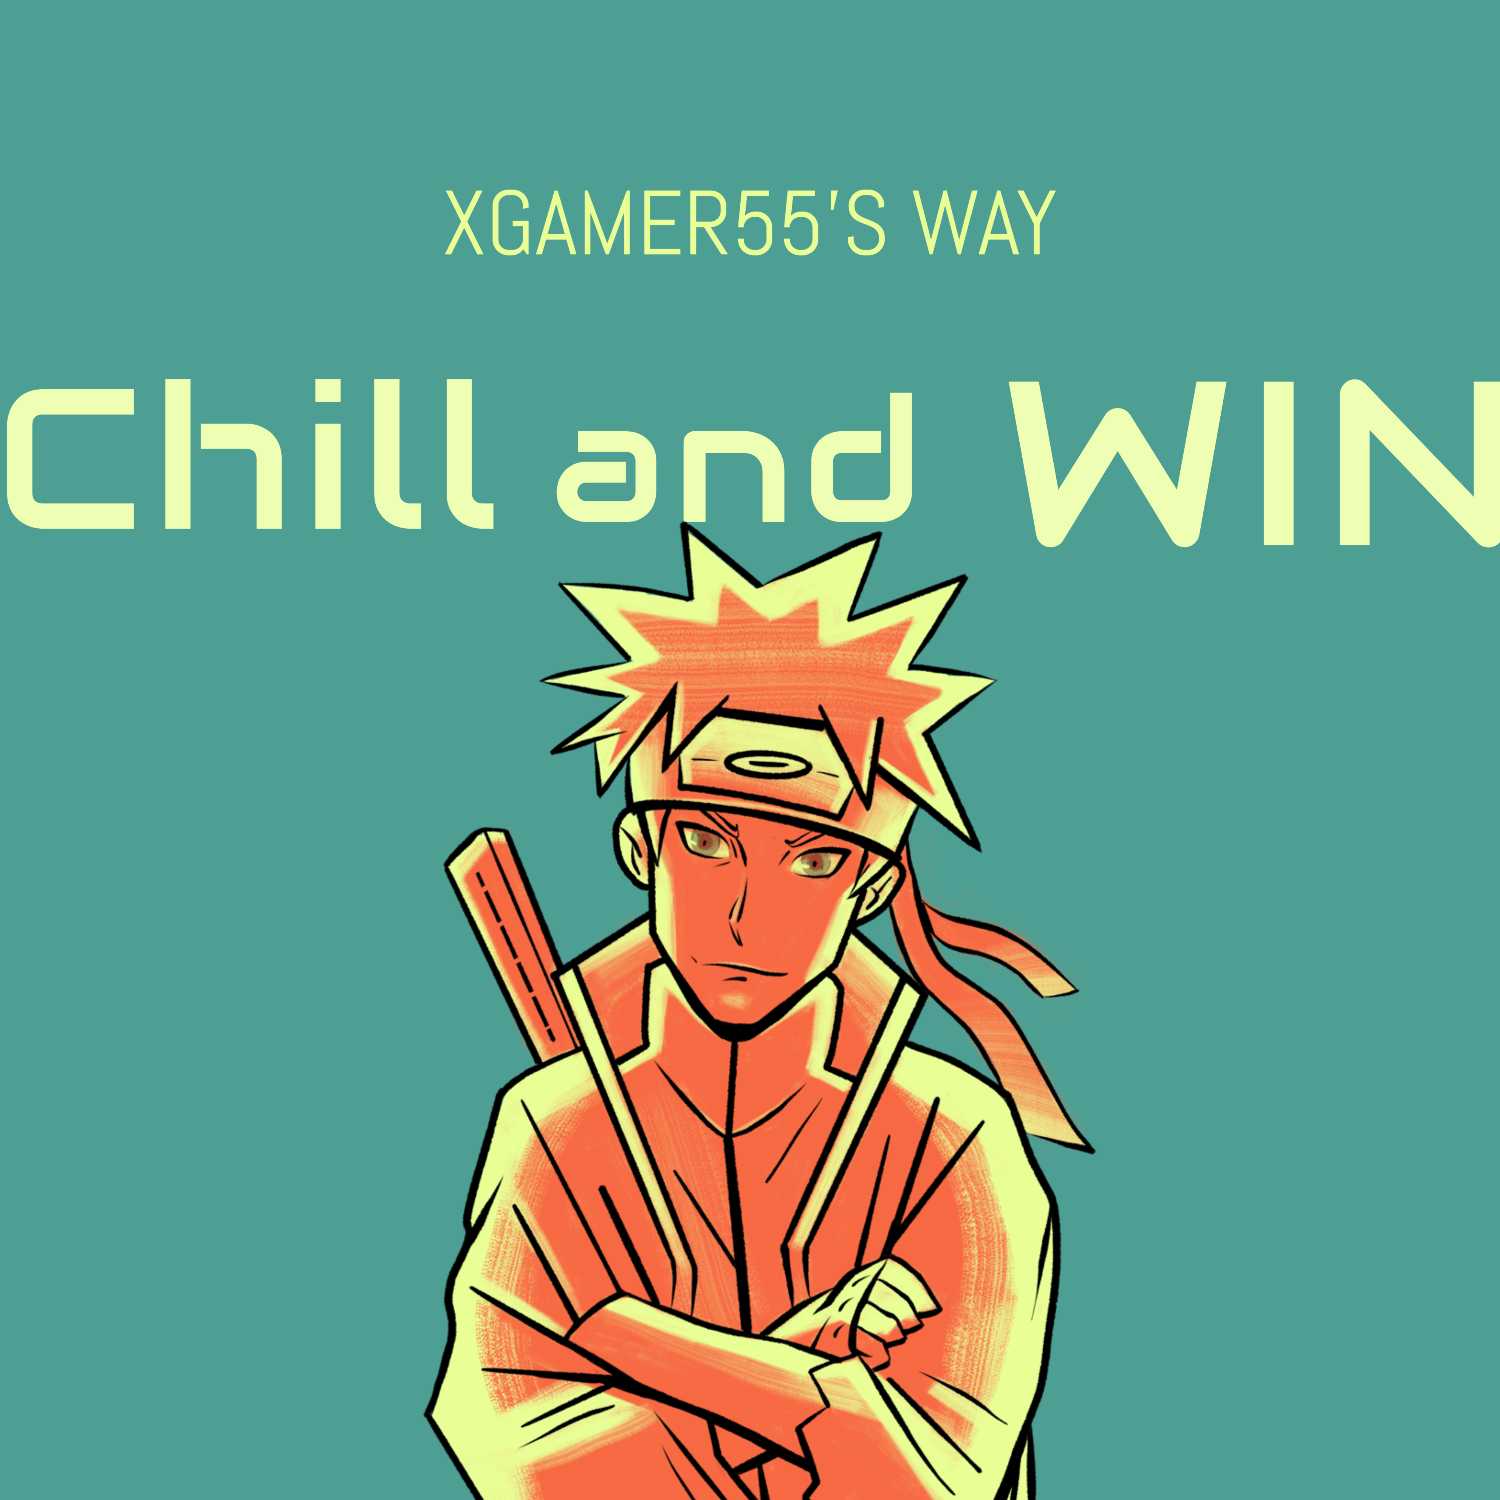 Chill and win gaming guide